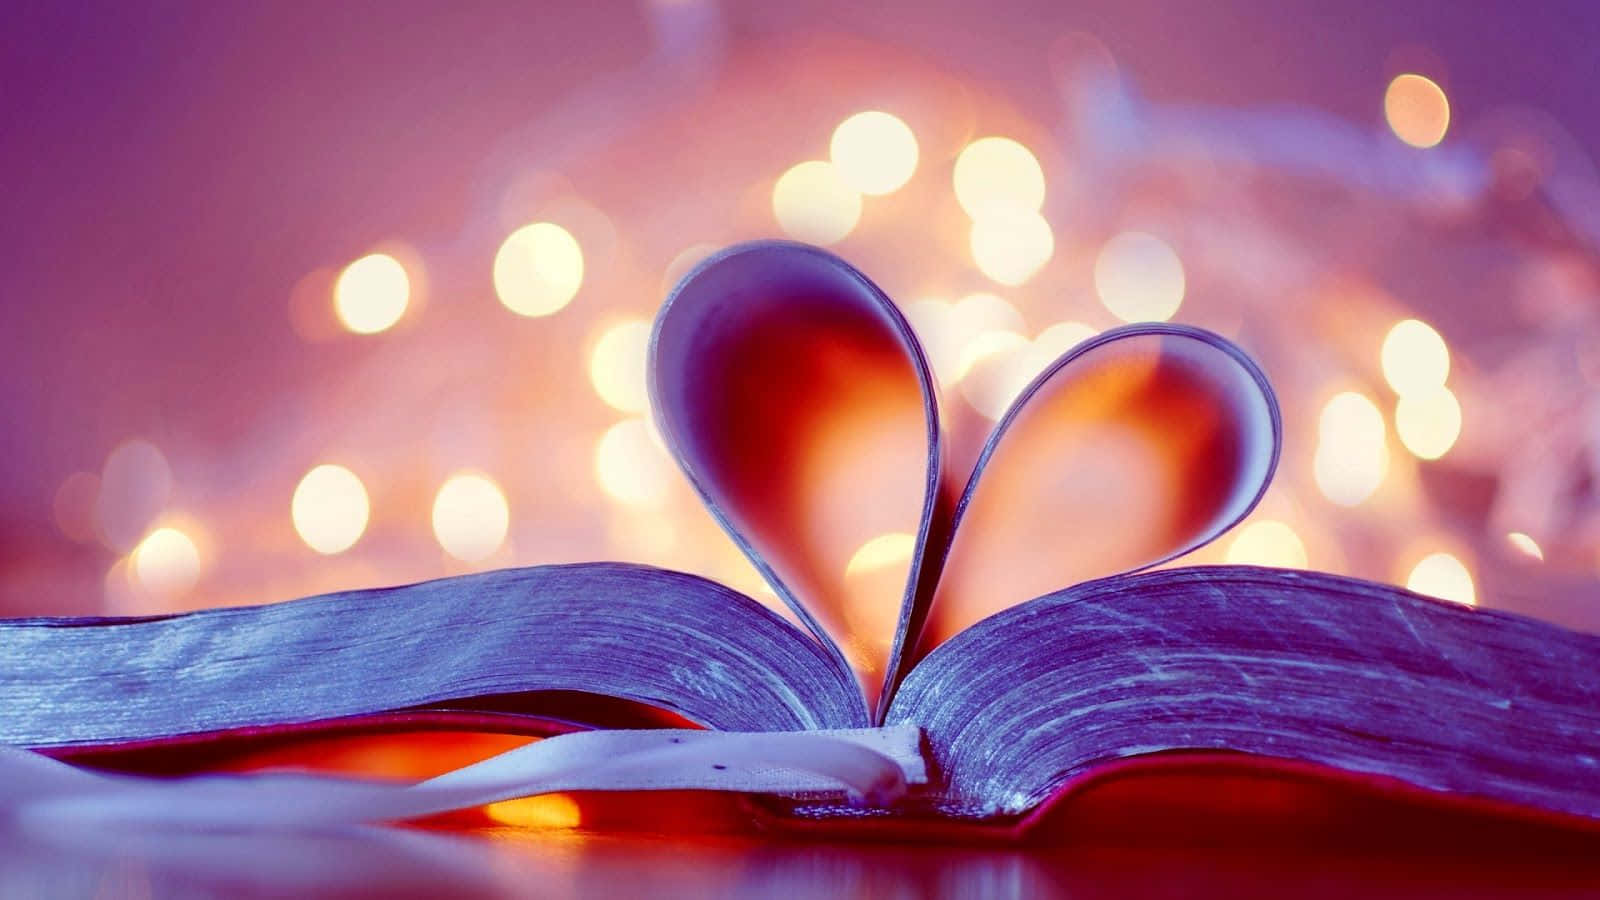 A Book With Hearts On It And Lights Behind It Wallpaper